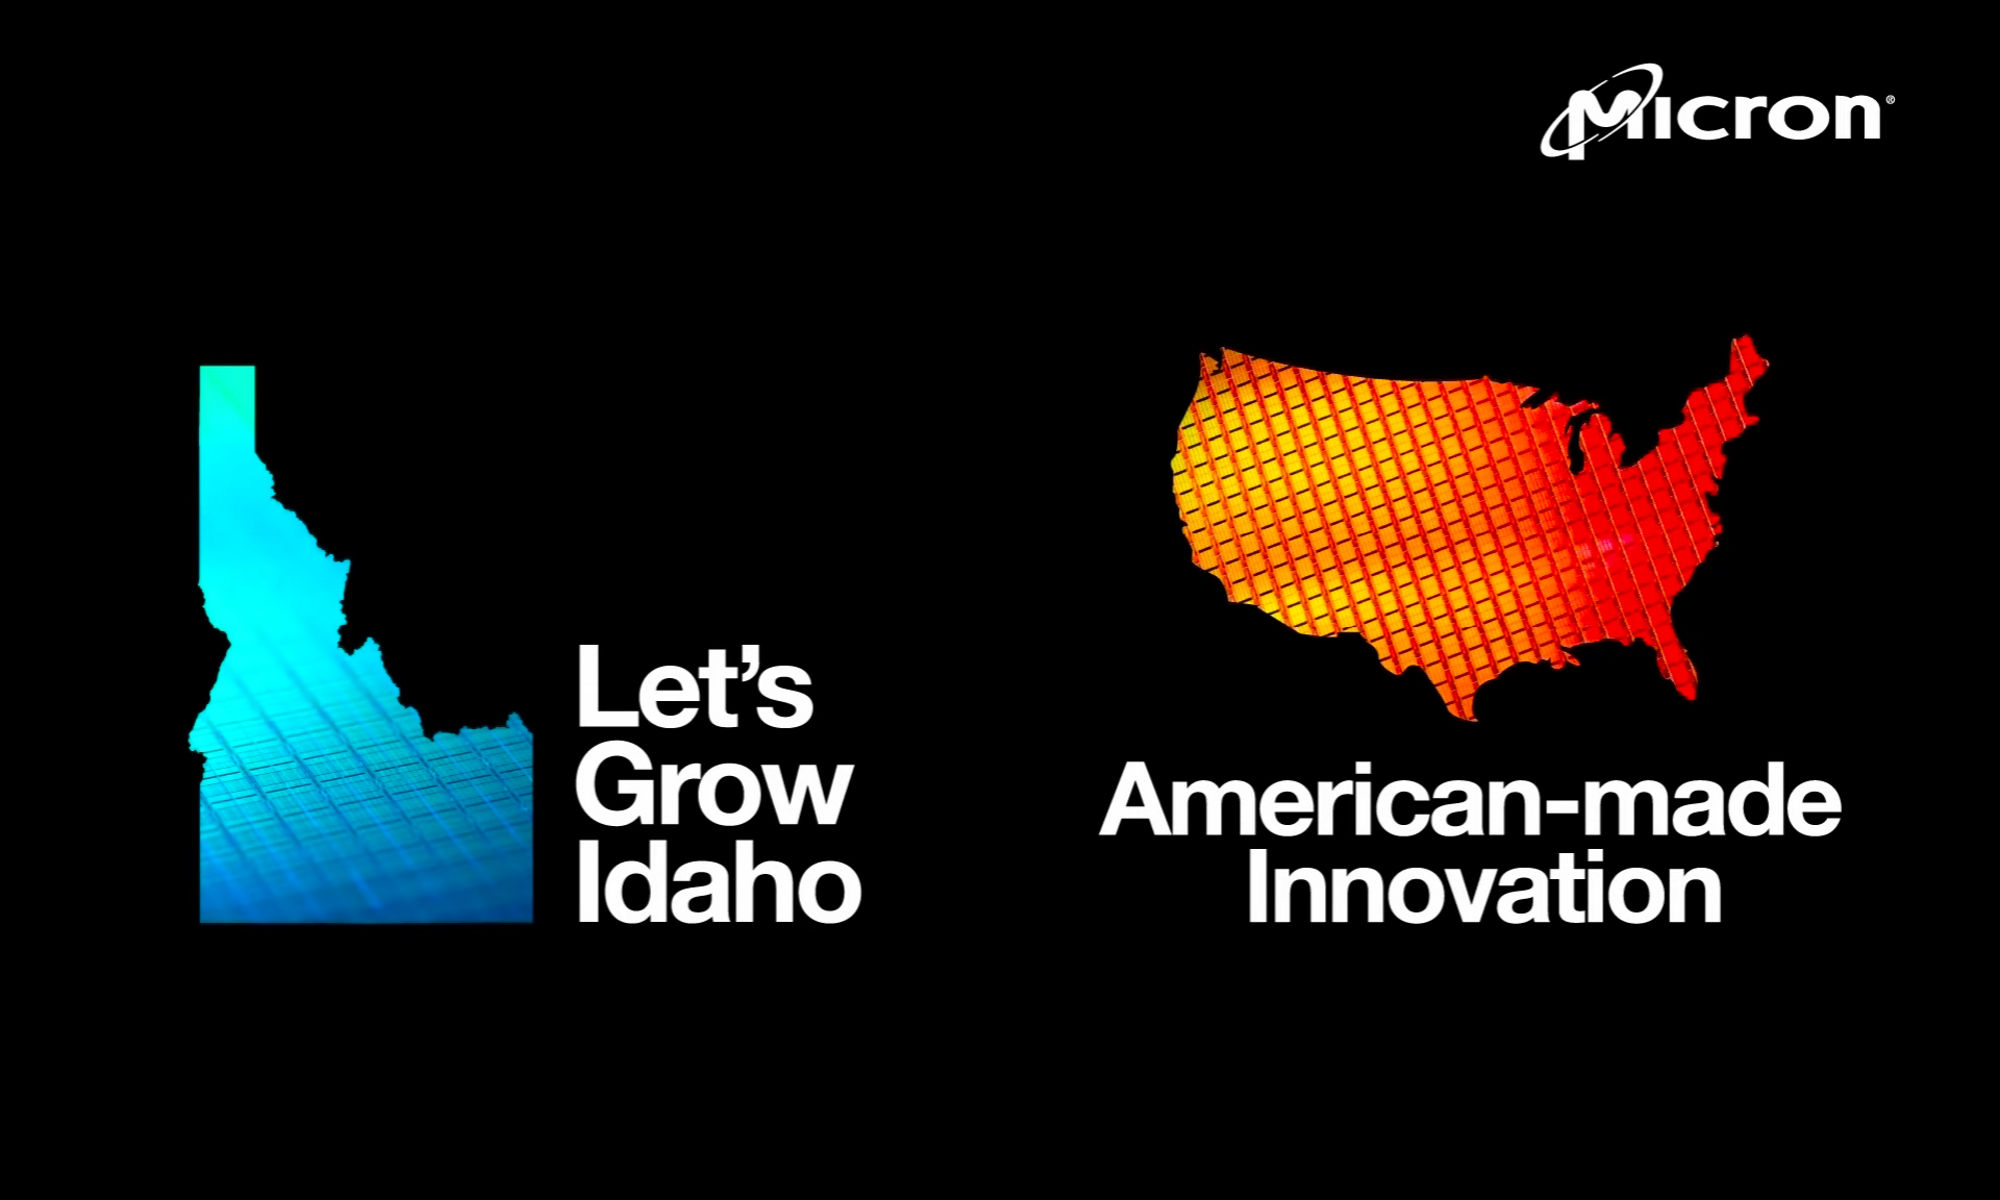 Lets Grow Idaho and American-made Innovation. Idaho and USA maps with wafers filling their centers